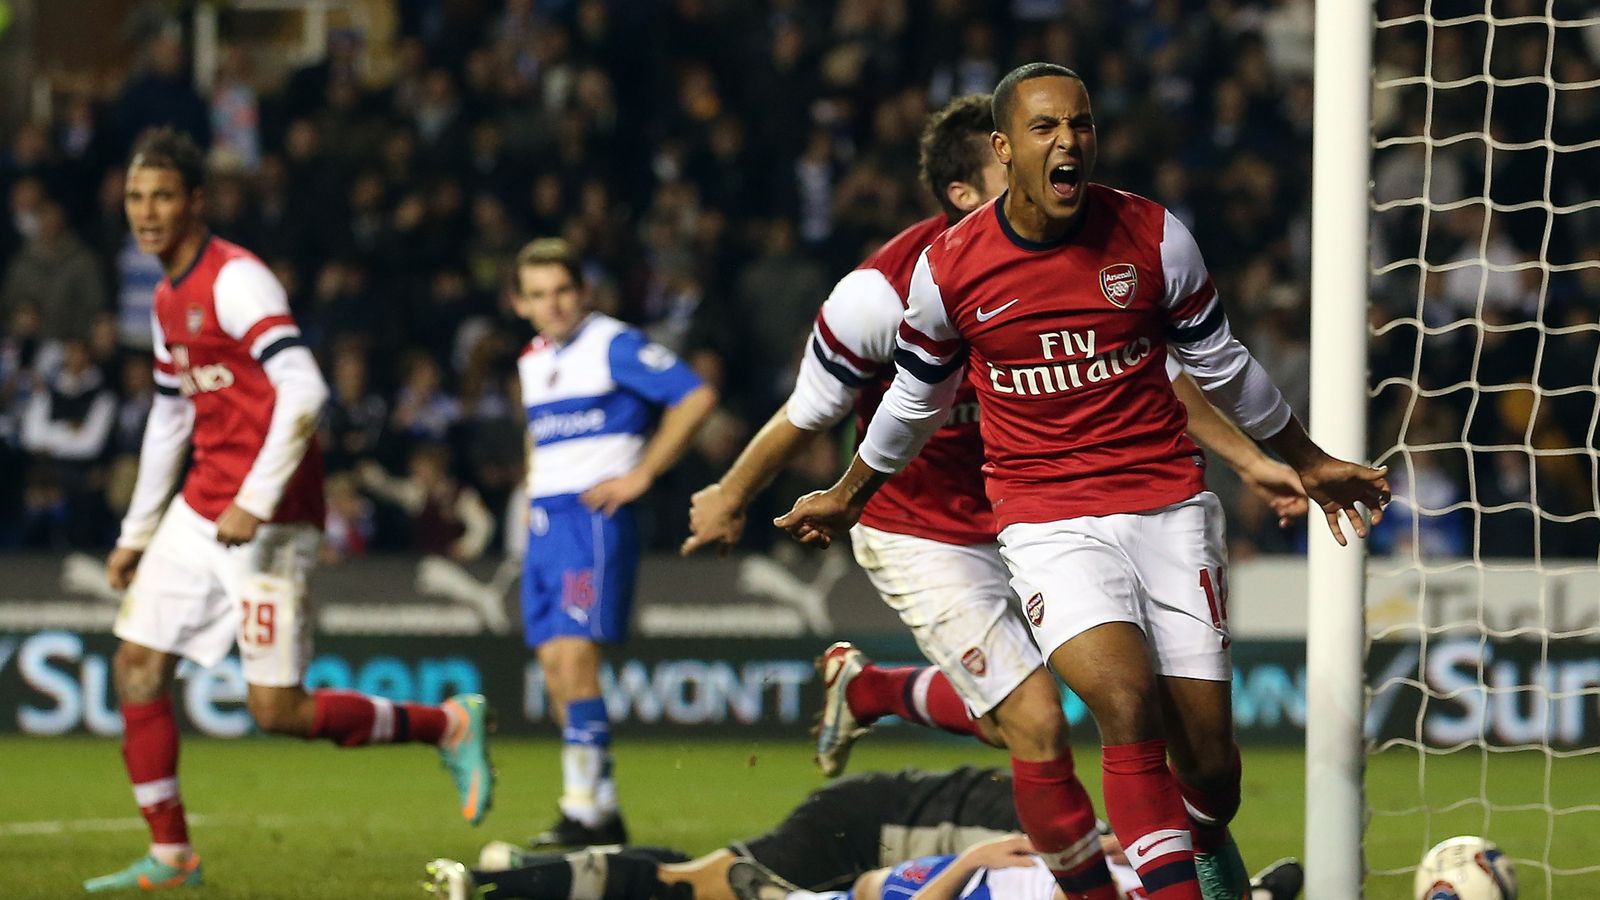 Arsenal vs Reading 7-5: The Unforgettable Football Spectacle